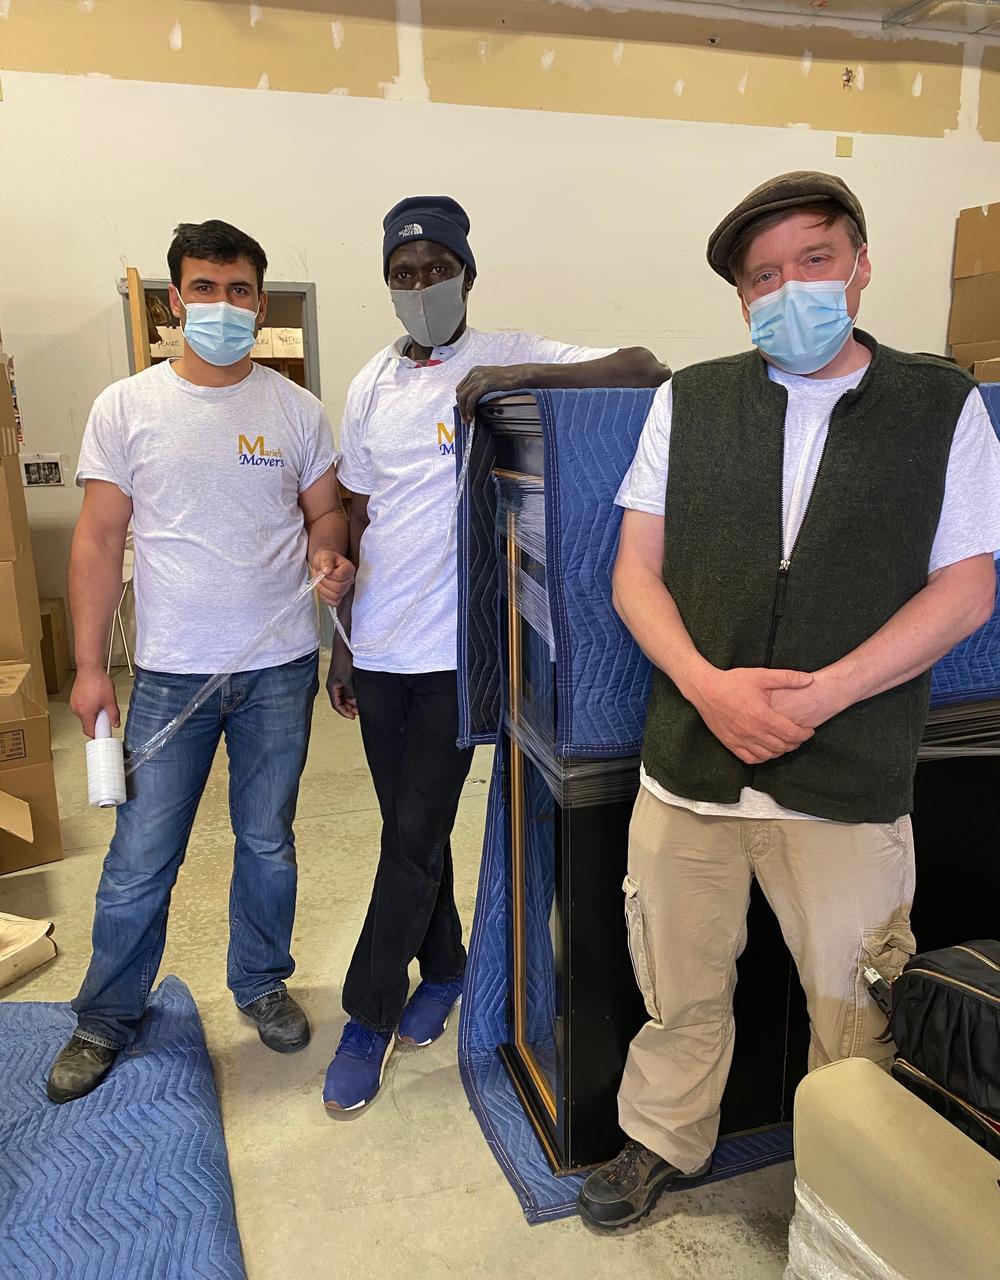 Anur Abdella (center), a refugee from Sudan, with colleagues at the moving company where he works in Connecticut. A multifaith team of local volunteers has helped Abdella, his wife and children get settled into their new life in the U.S.